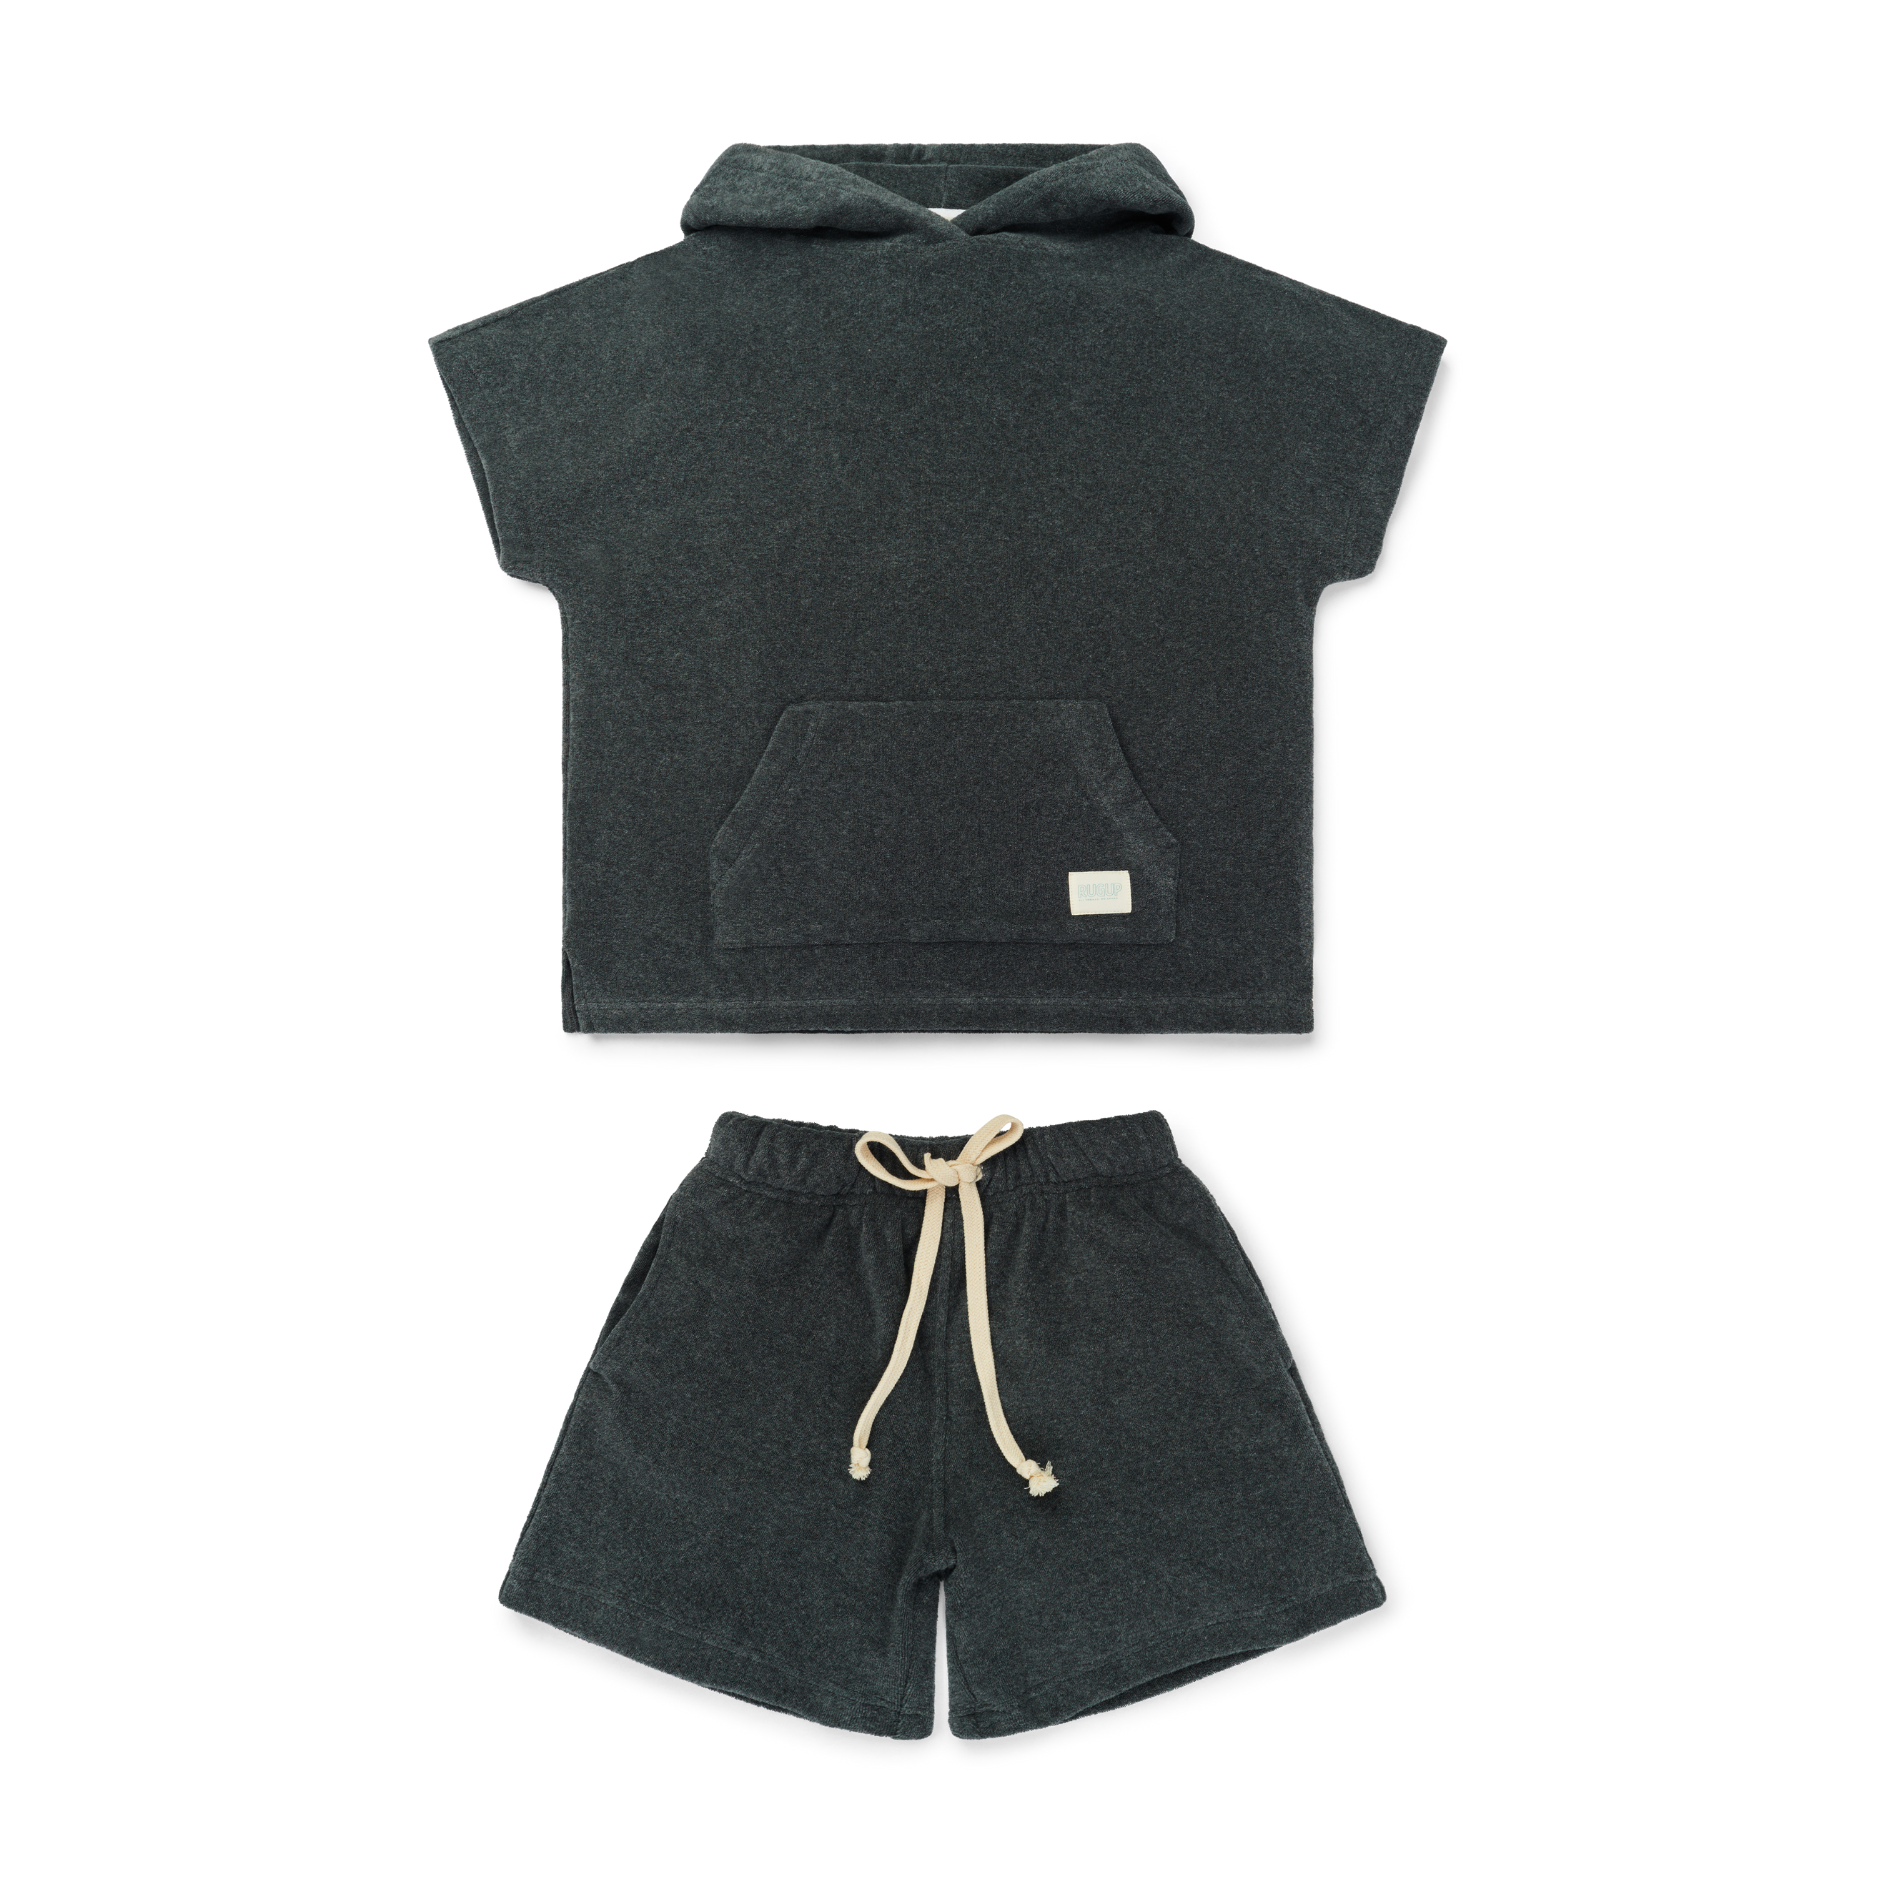 Charcoal Grey Rugii Hooded Towel Top and shorts